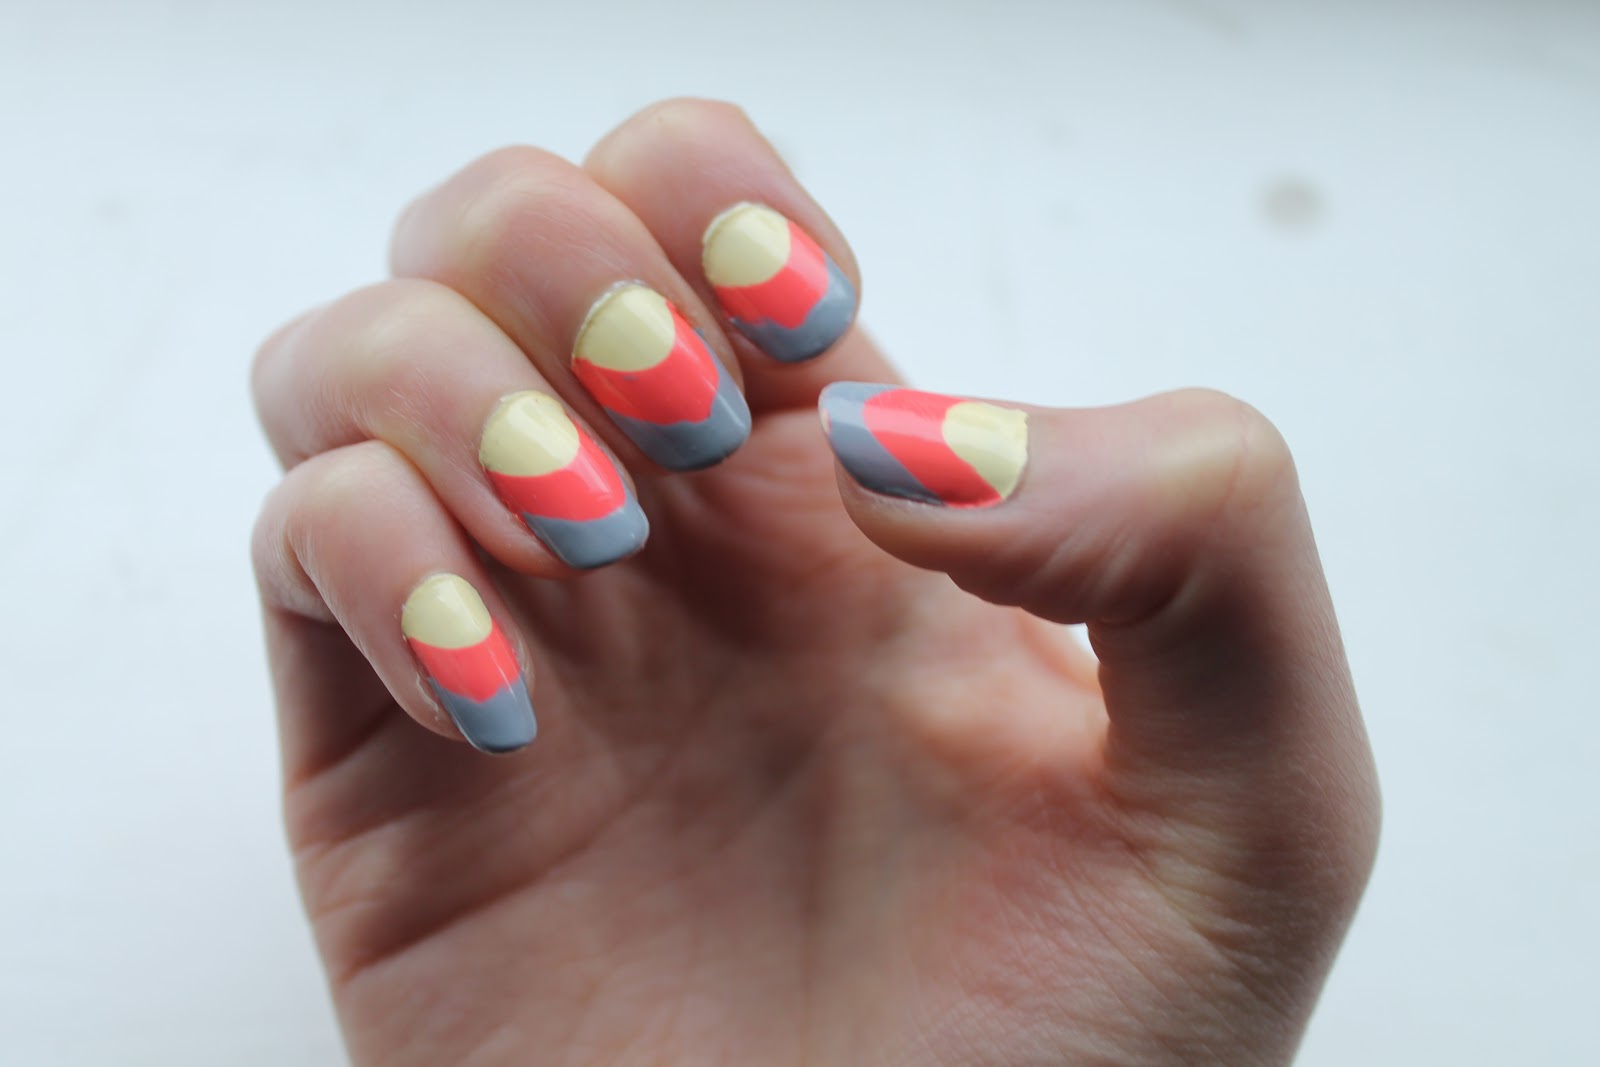 6. 25 Awesome Nail Designs for Short Nails - wide 8